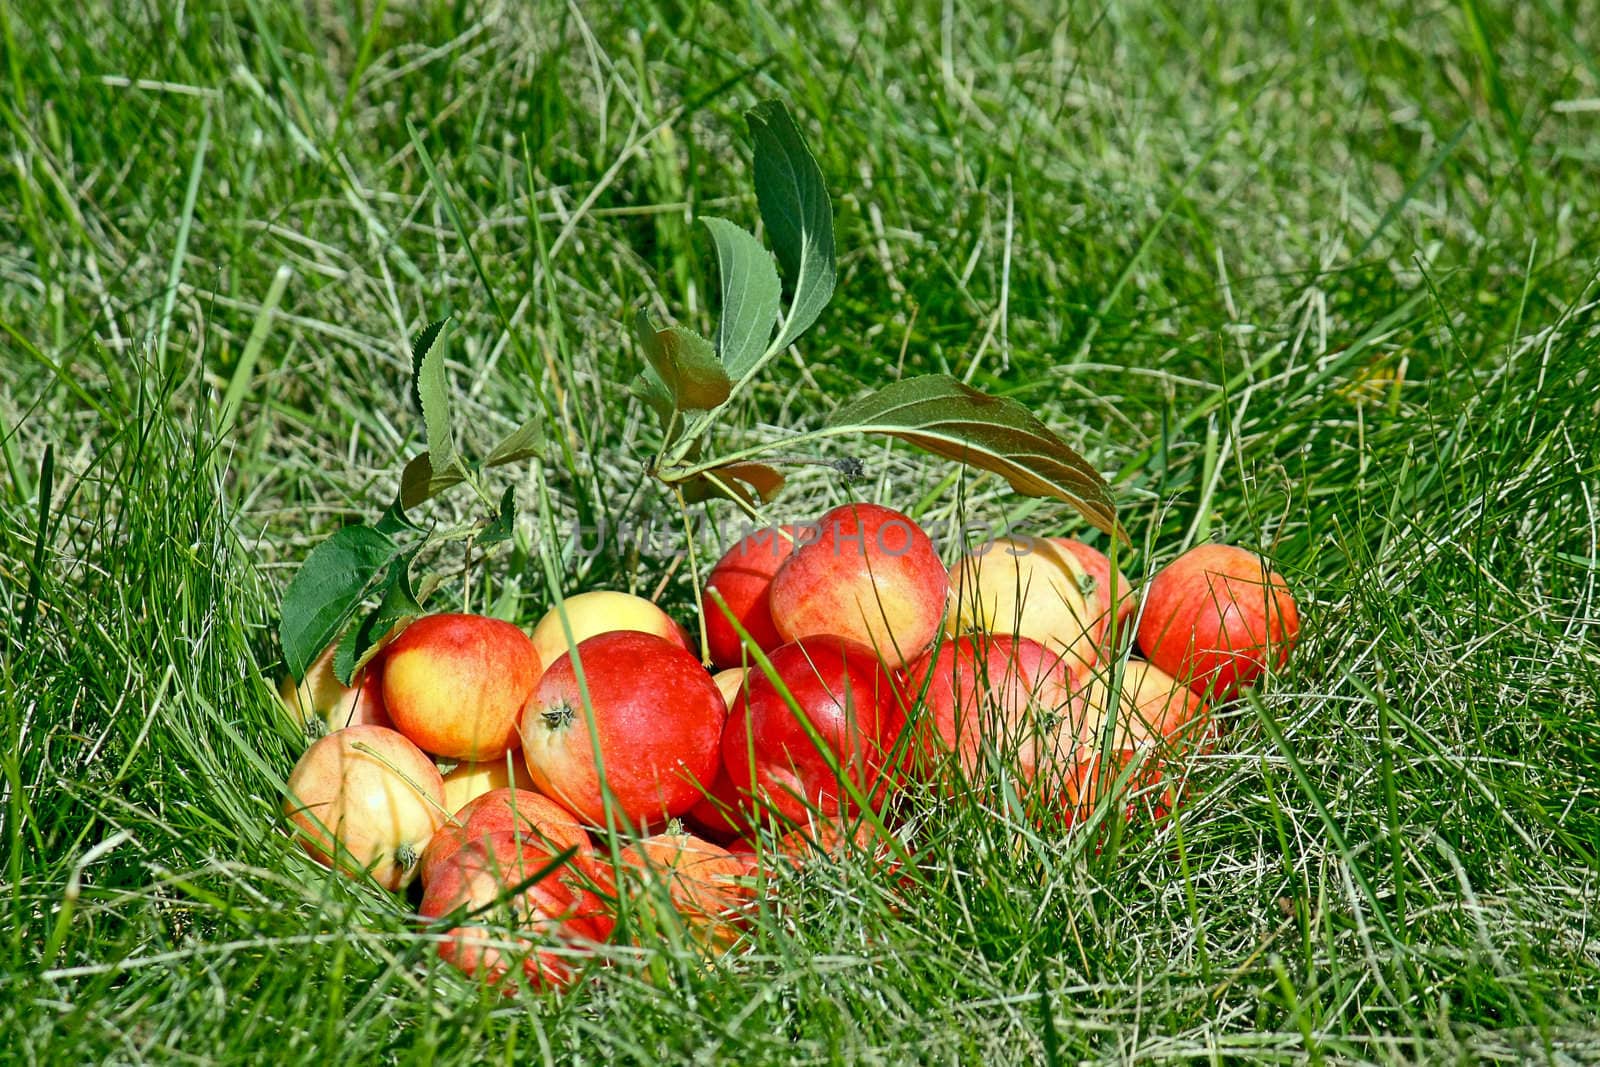 A bunch of red apples lie on the grass.